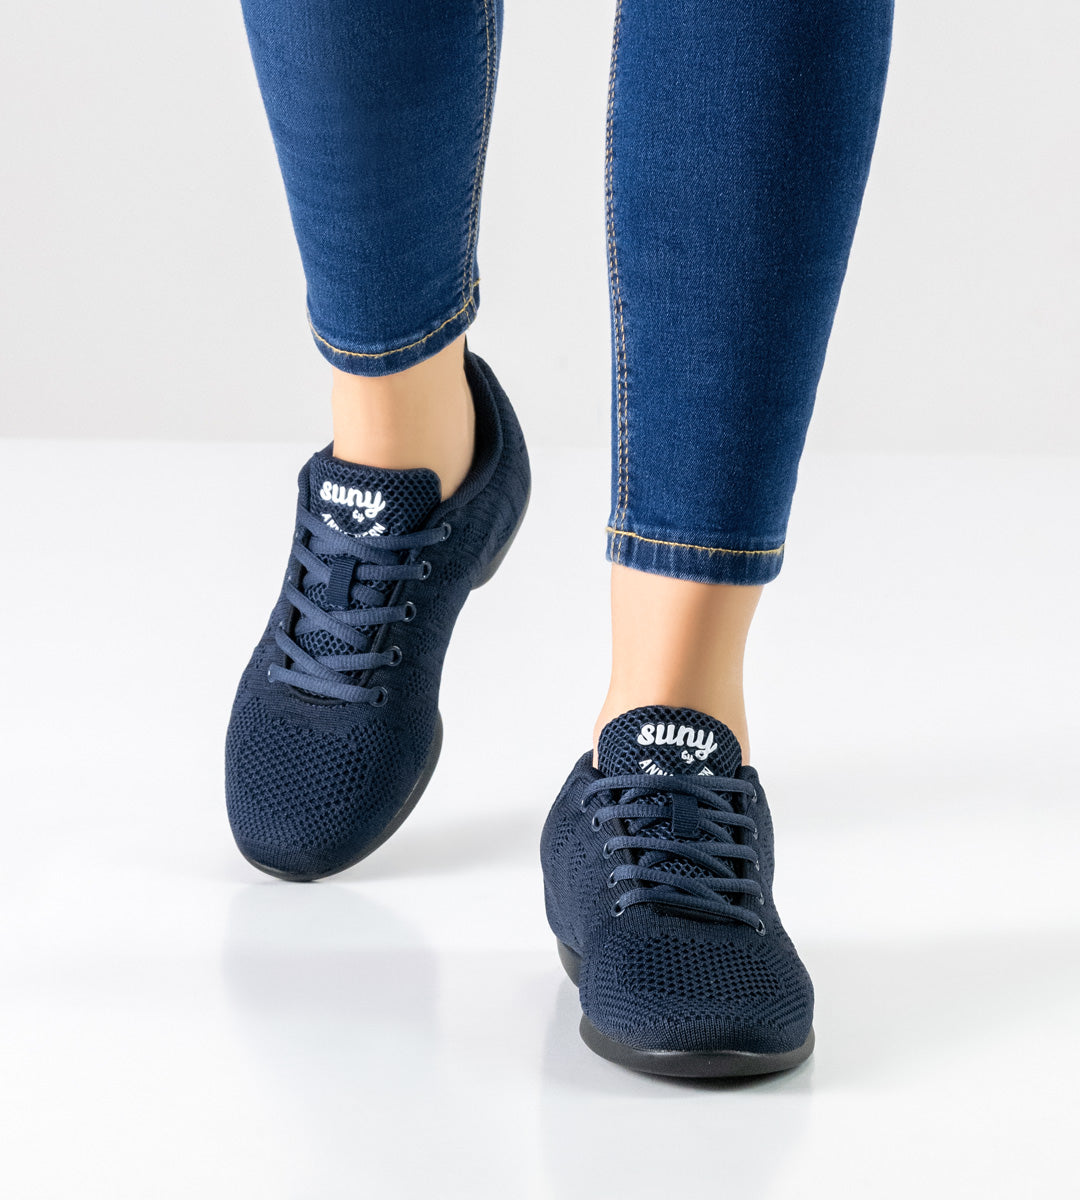 Knit practice sneakers for women blue and black